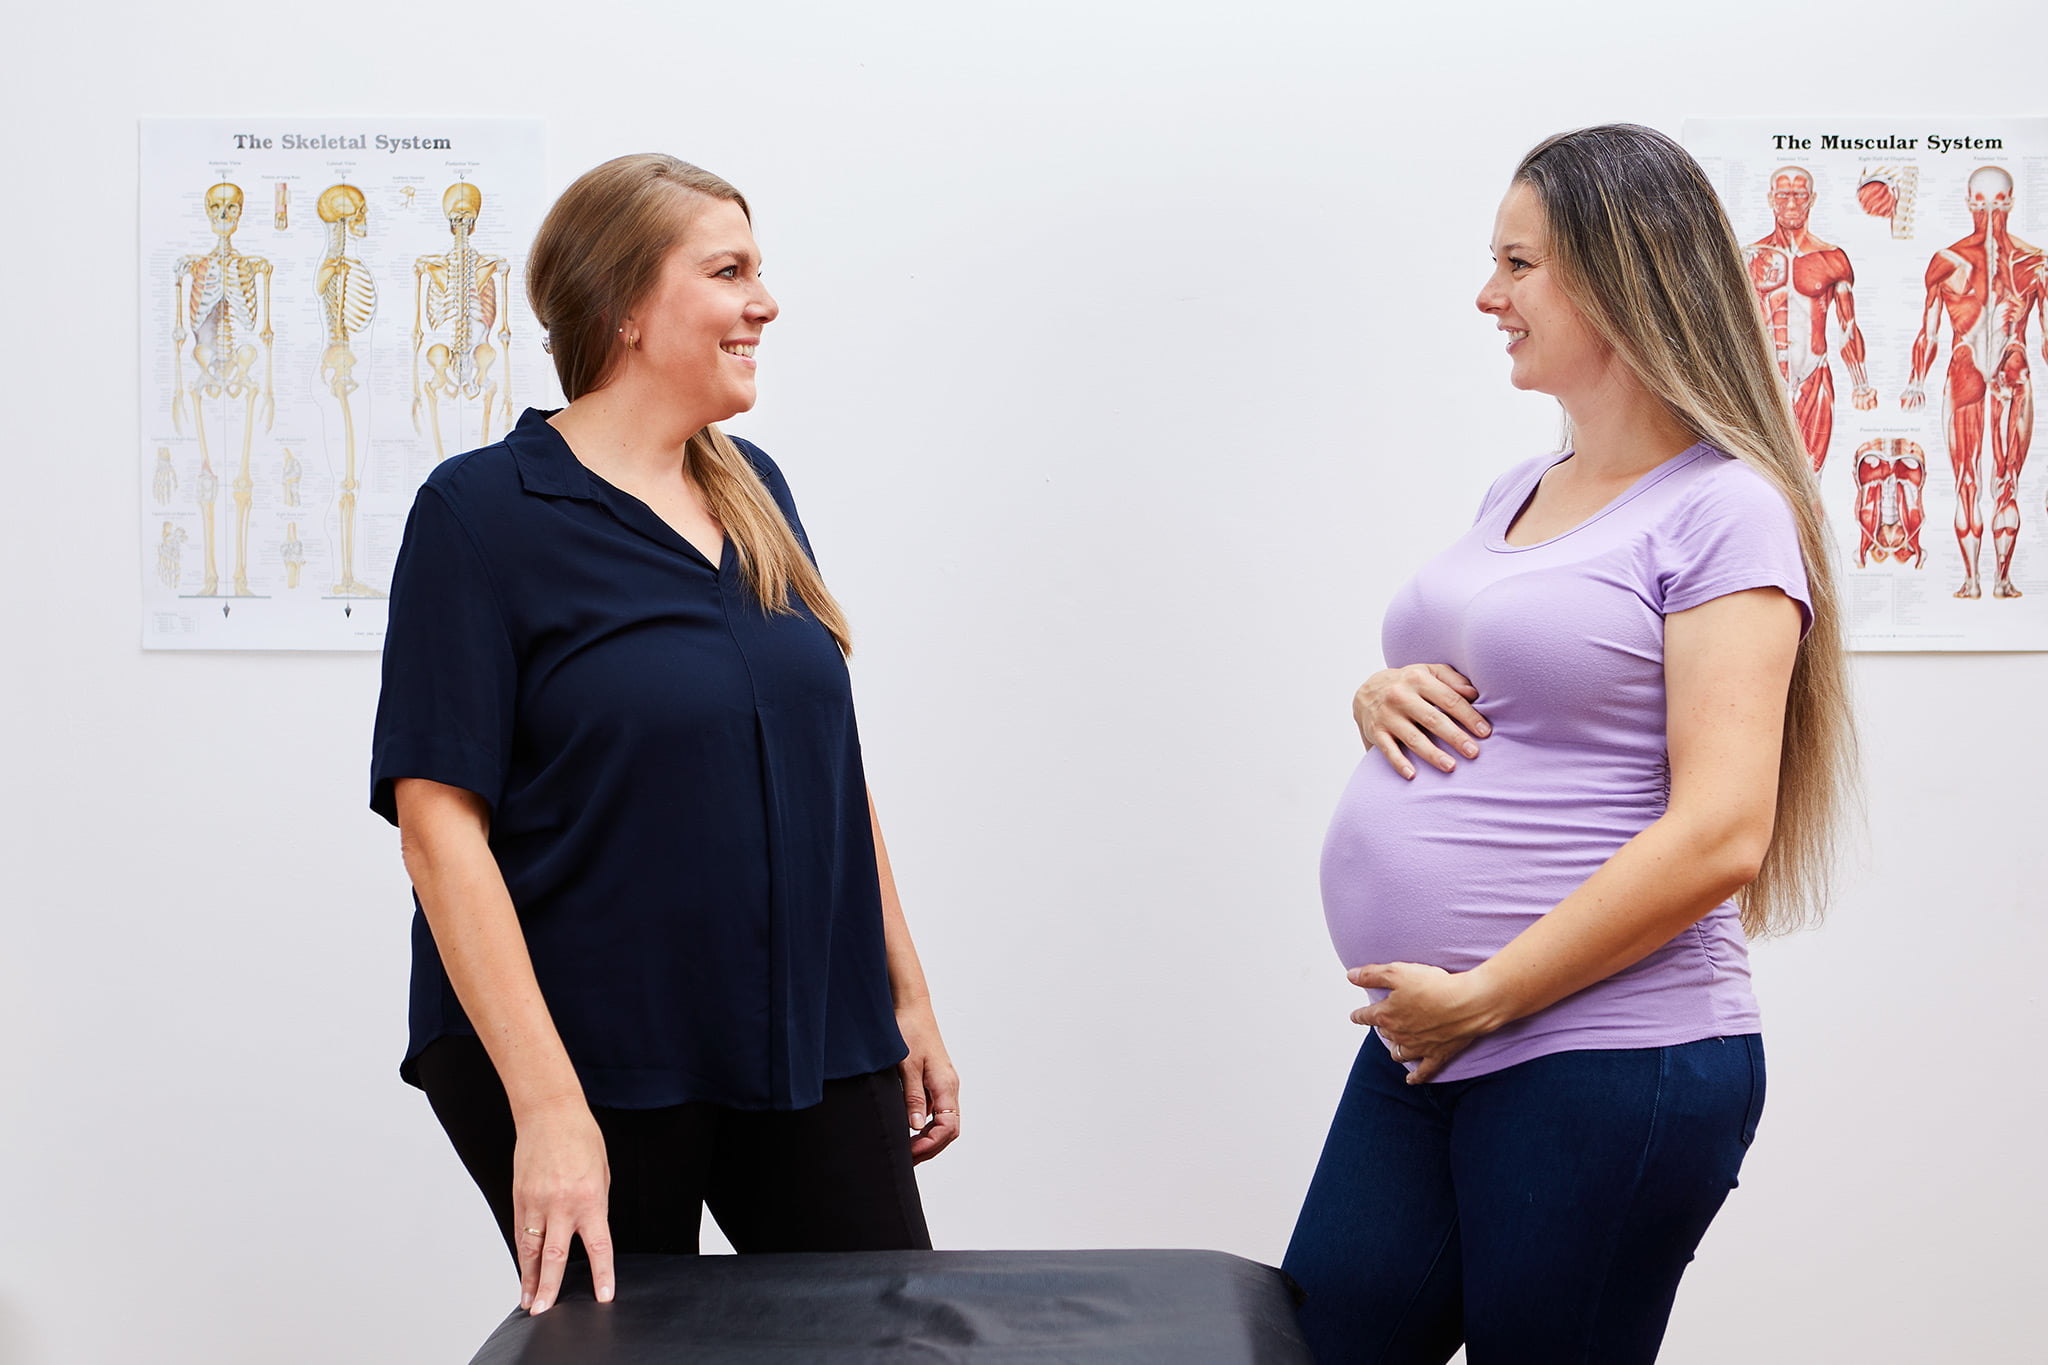 Postpartum Chiropractor - Powerful Care for New Mothers